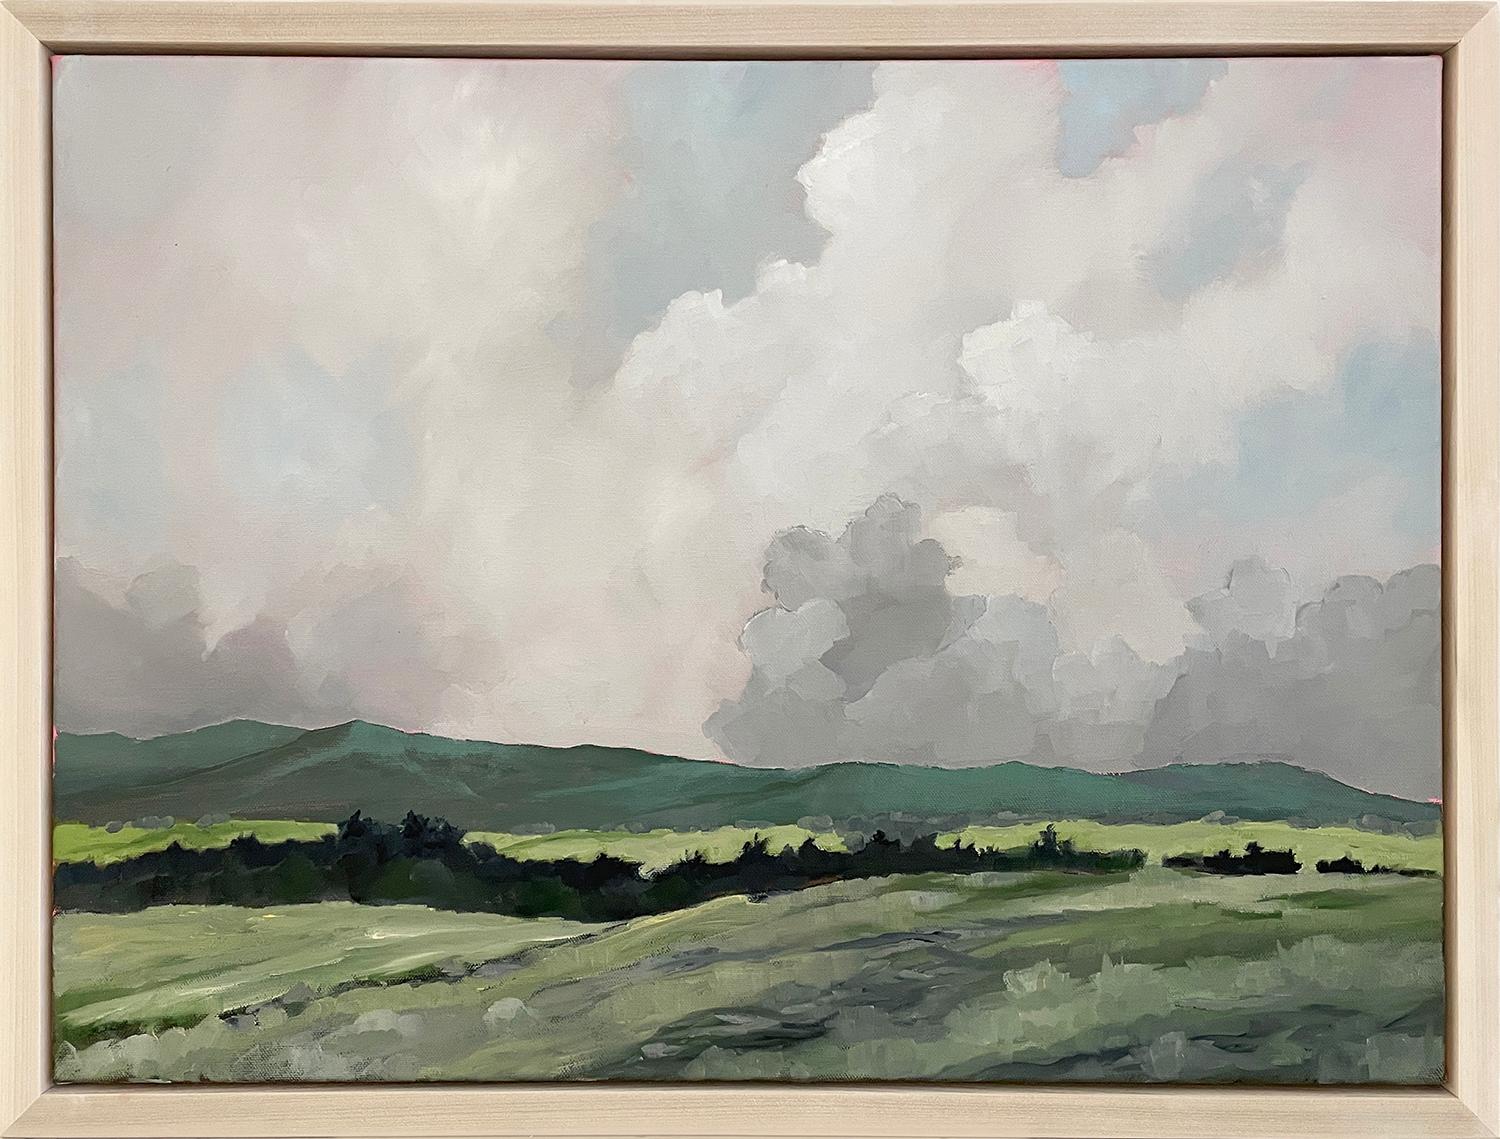 Joseph Rapp Figurative Painting - Clearing Storm (En Plein Air Landscape Painting of Country Mountains & Grey Sky)